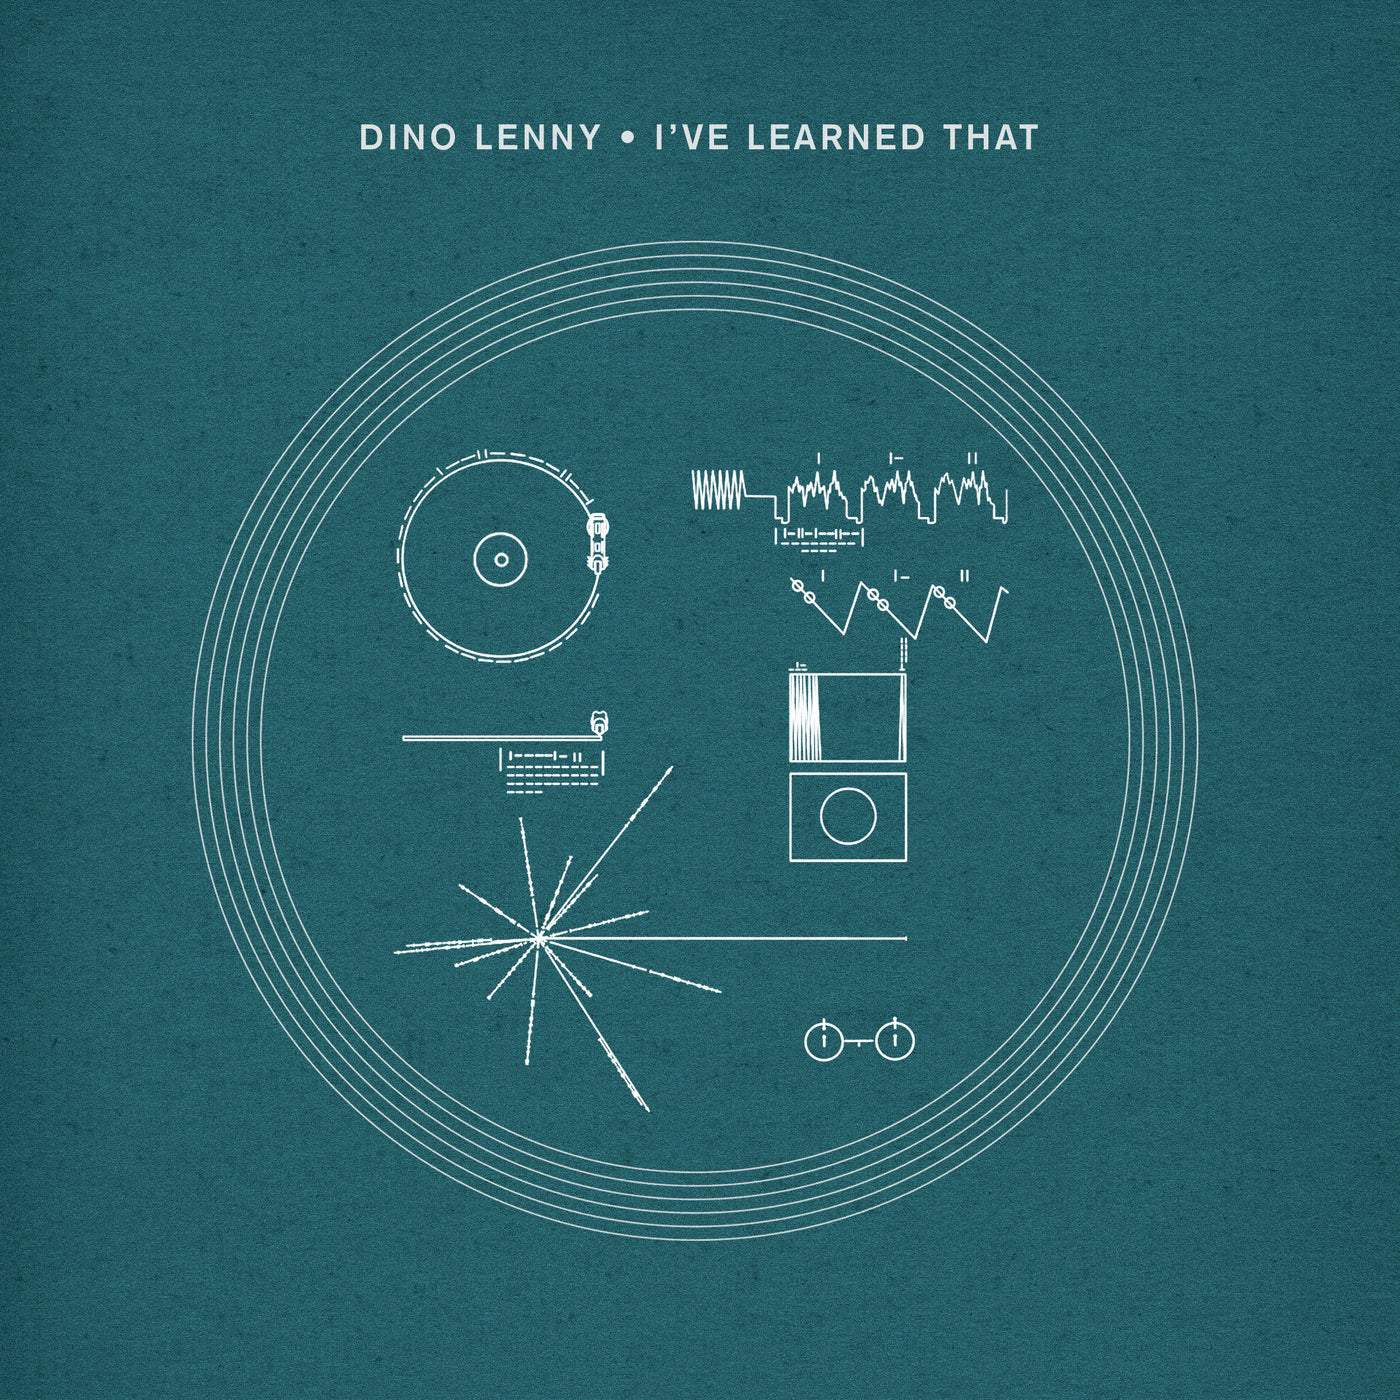 Download Dino Lenny - I've Learned That on Electrobuzz